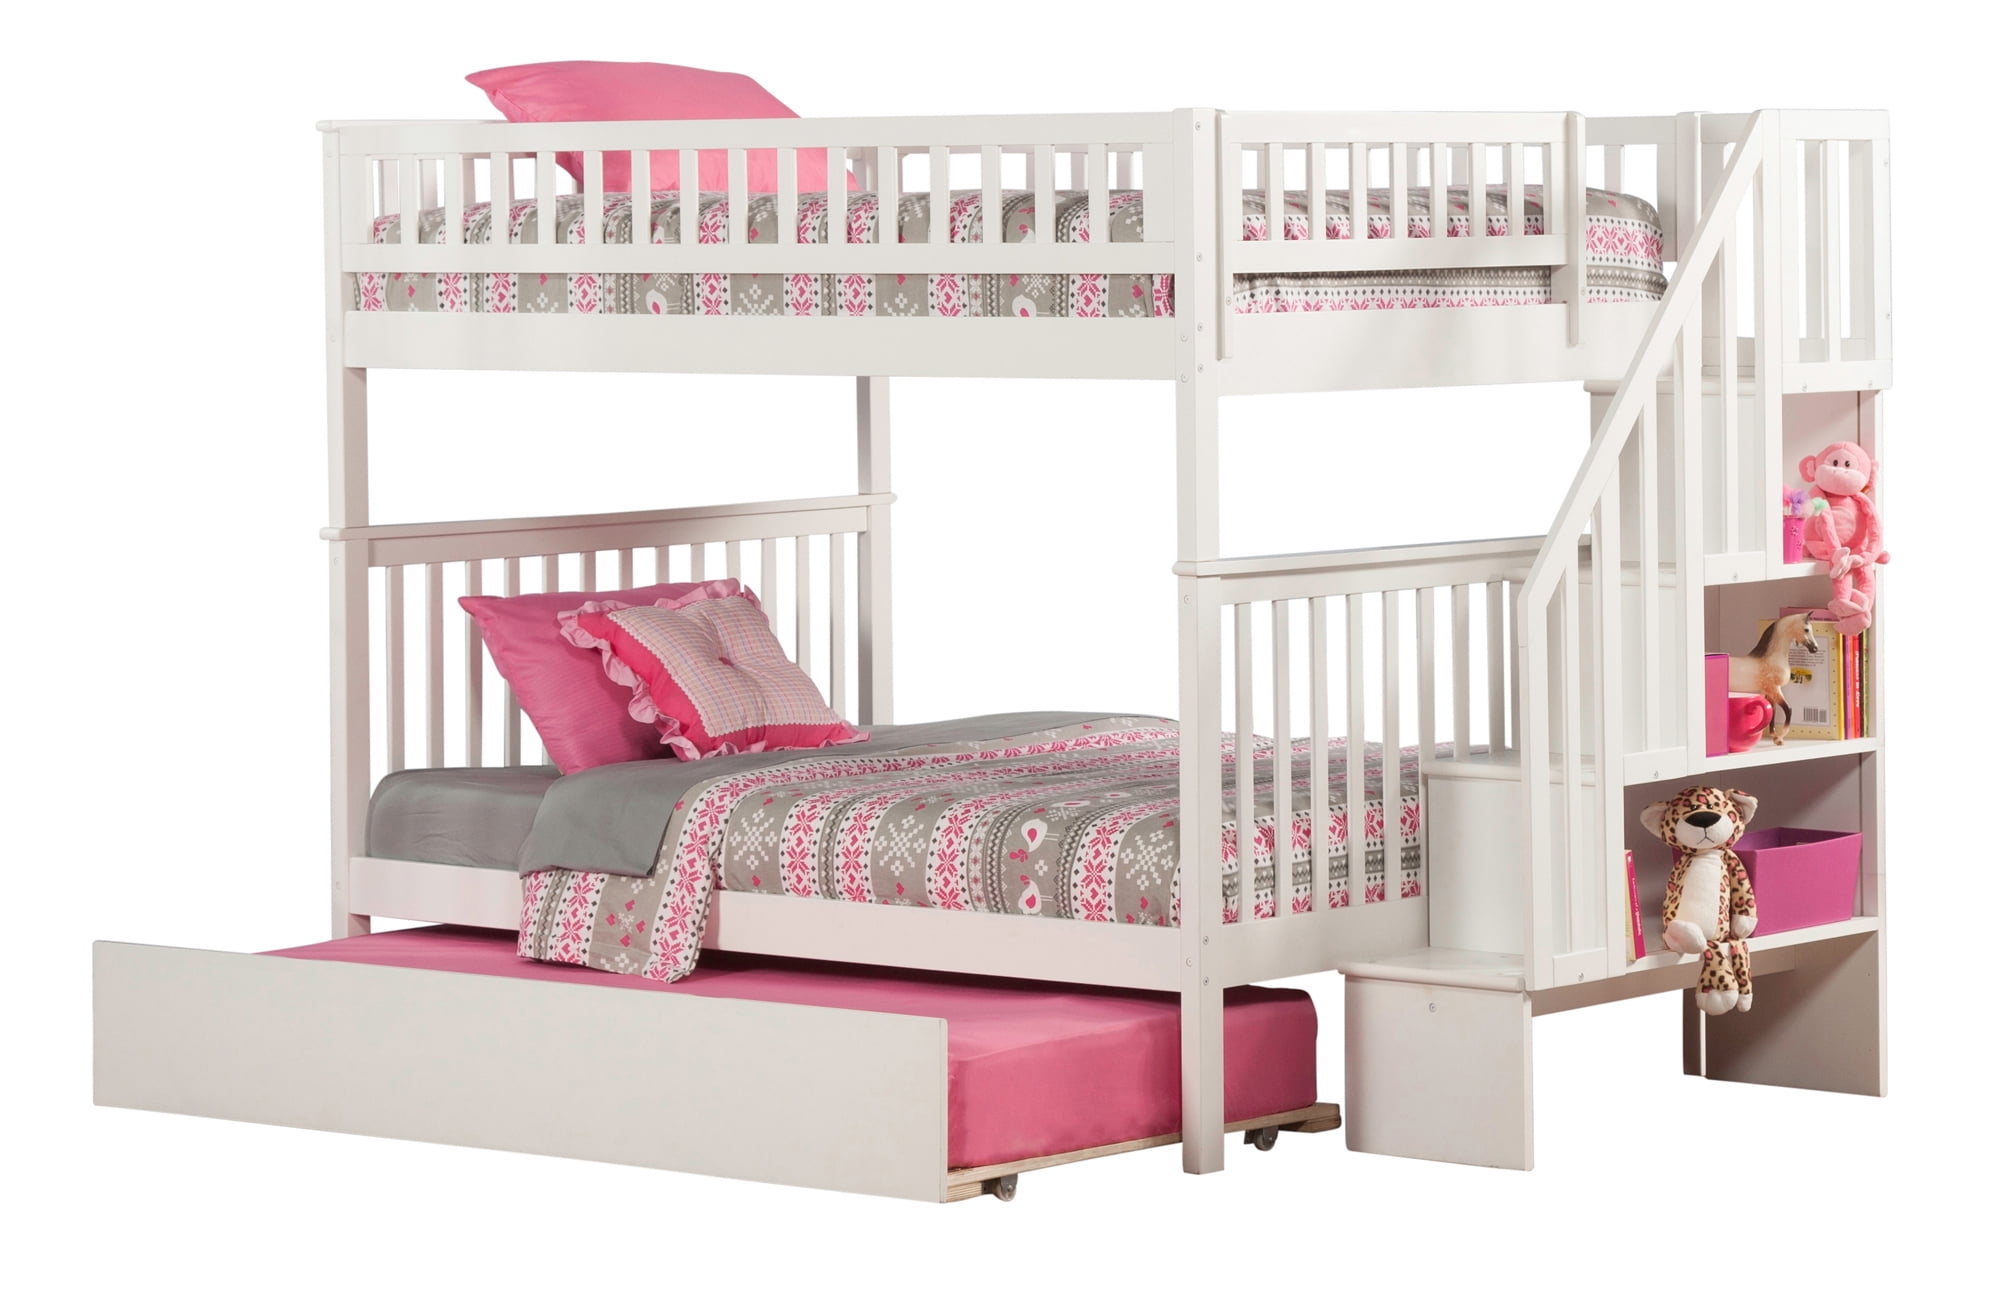 Woodland Staircase Bunk Bed Full Over, Shyann Bunk Bed